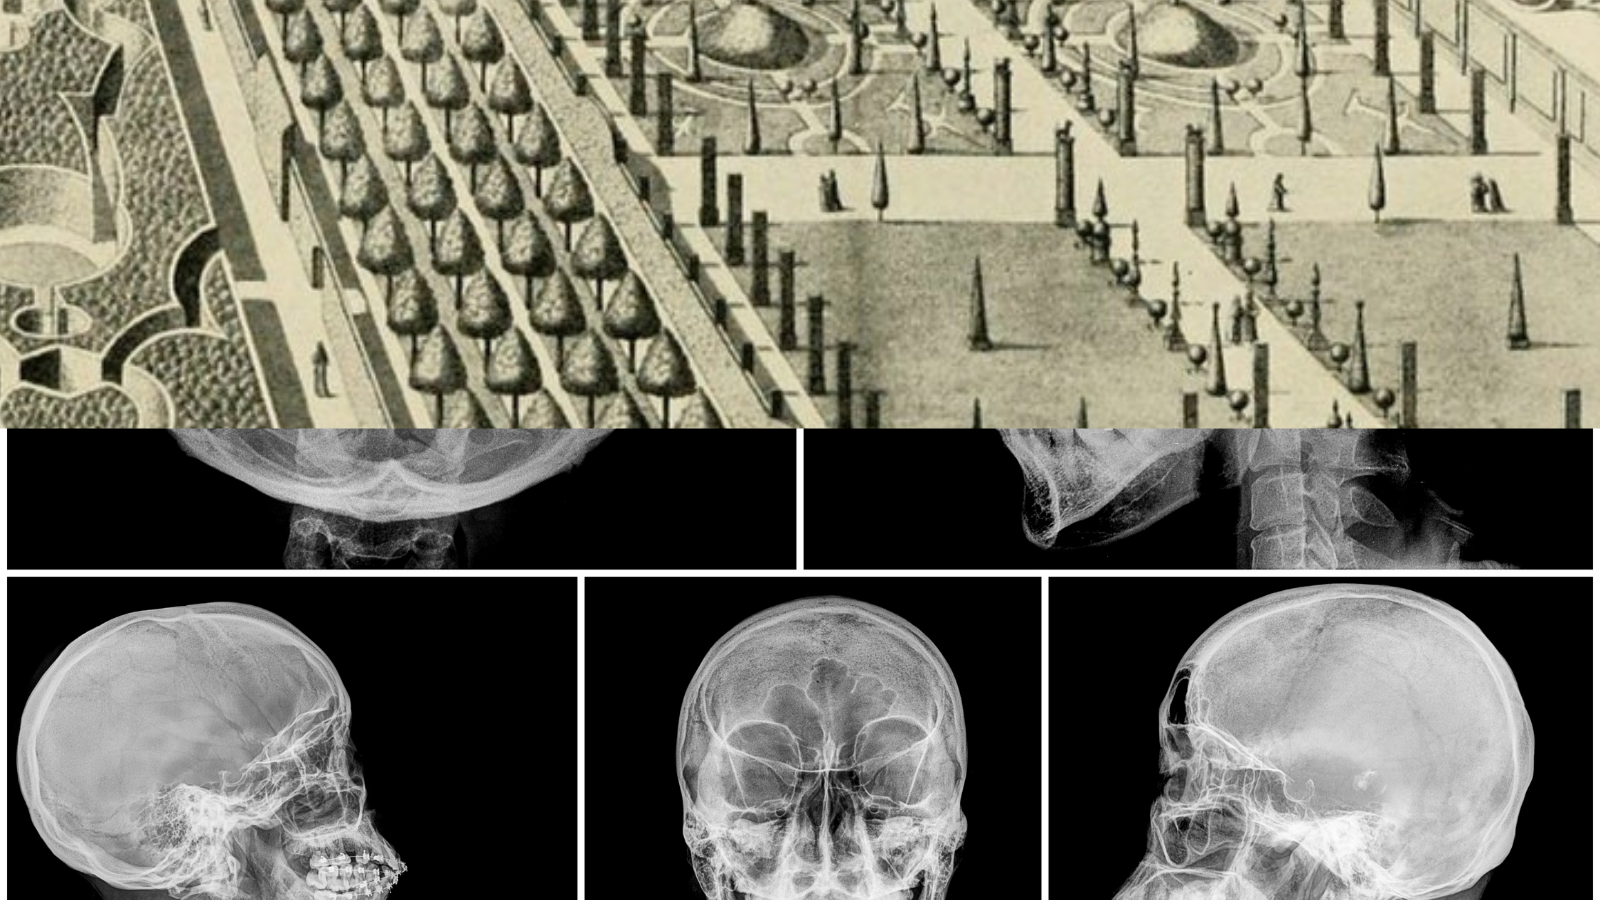 A collage image with a black and white illustration of a Renaissance garden in the top half and an x-ray of a skull from various angles in the bottom half